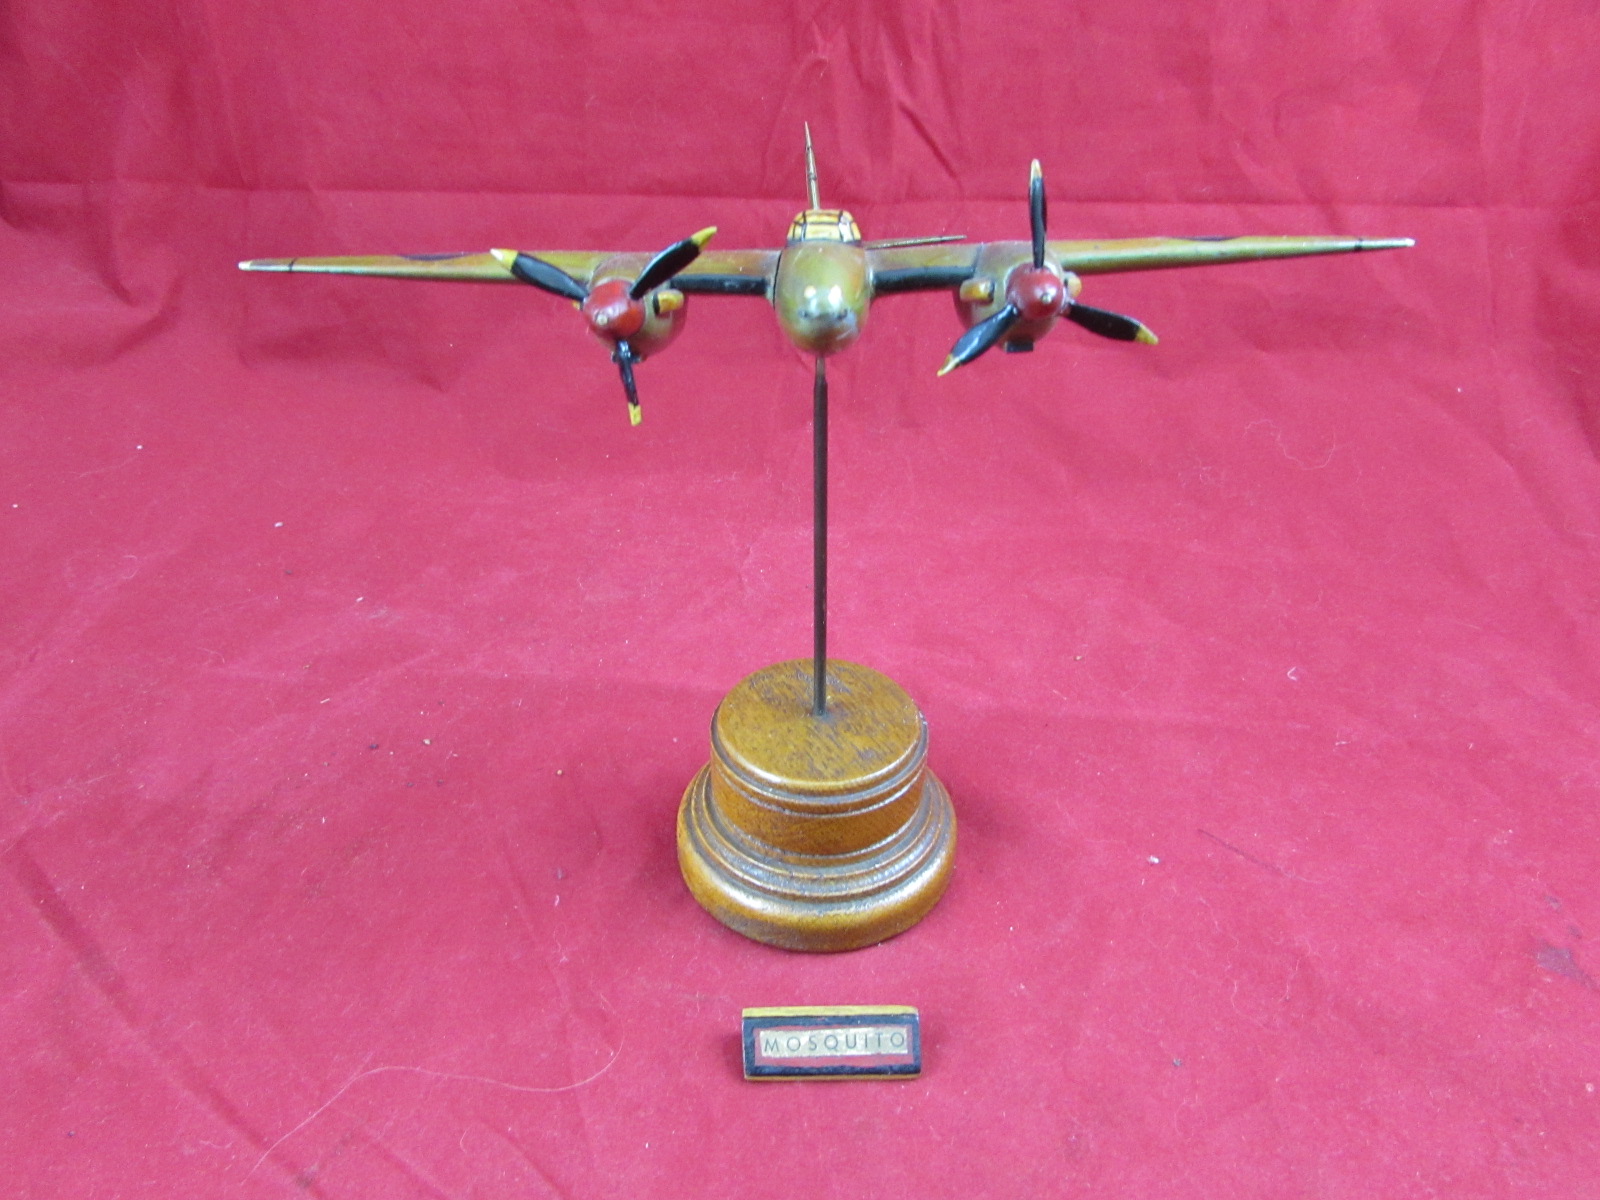 WW2 Hand Made and Hand Painted ..De Havilland DH 98 Mosquito WW2 Fighter Bomber Aircraft Wooden Desktop Model